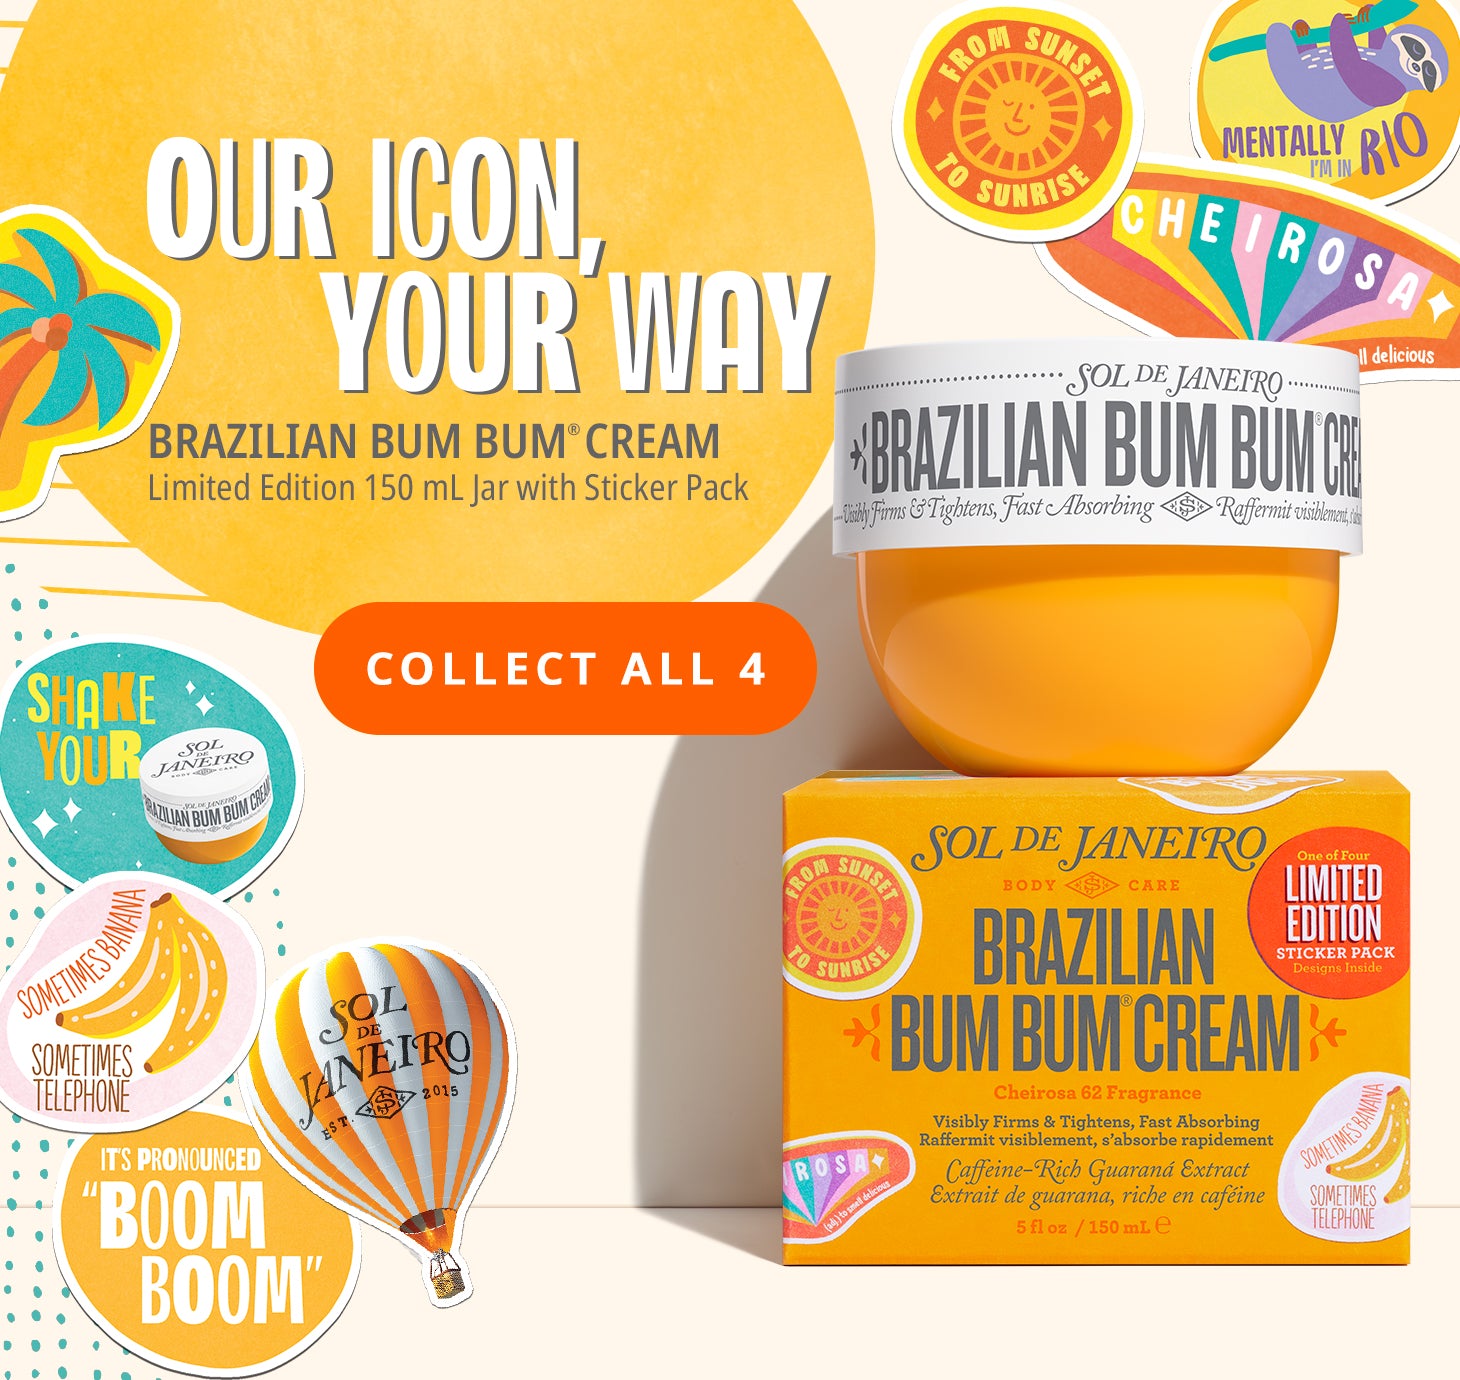 Our icon, your way - Brazilian Bum Bum Cream Limited Edition 150ml Jar with Sticker Pack. Collect all 4!